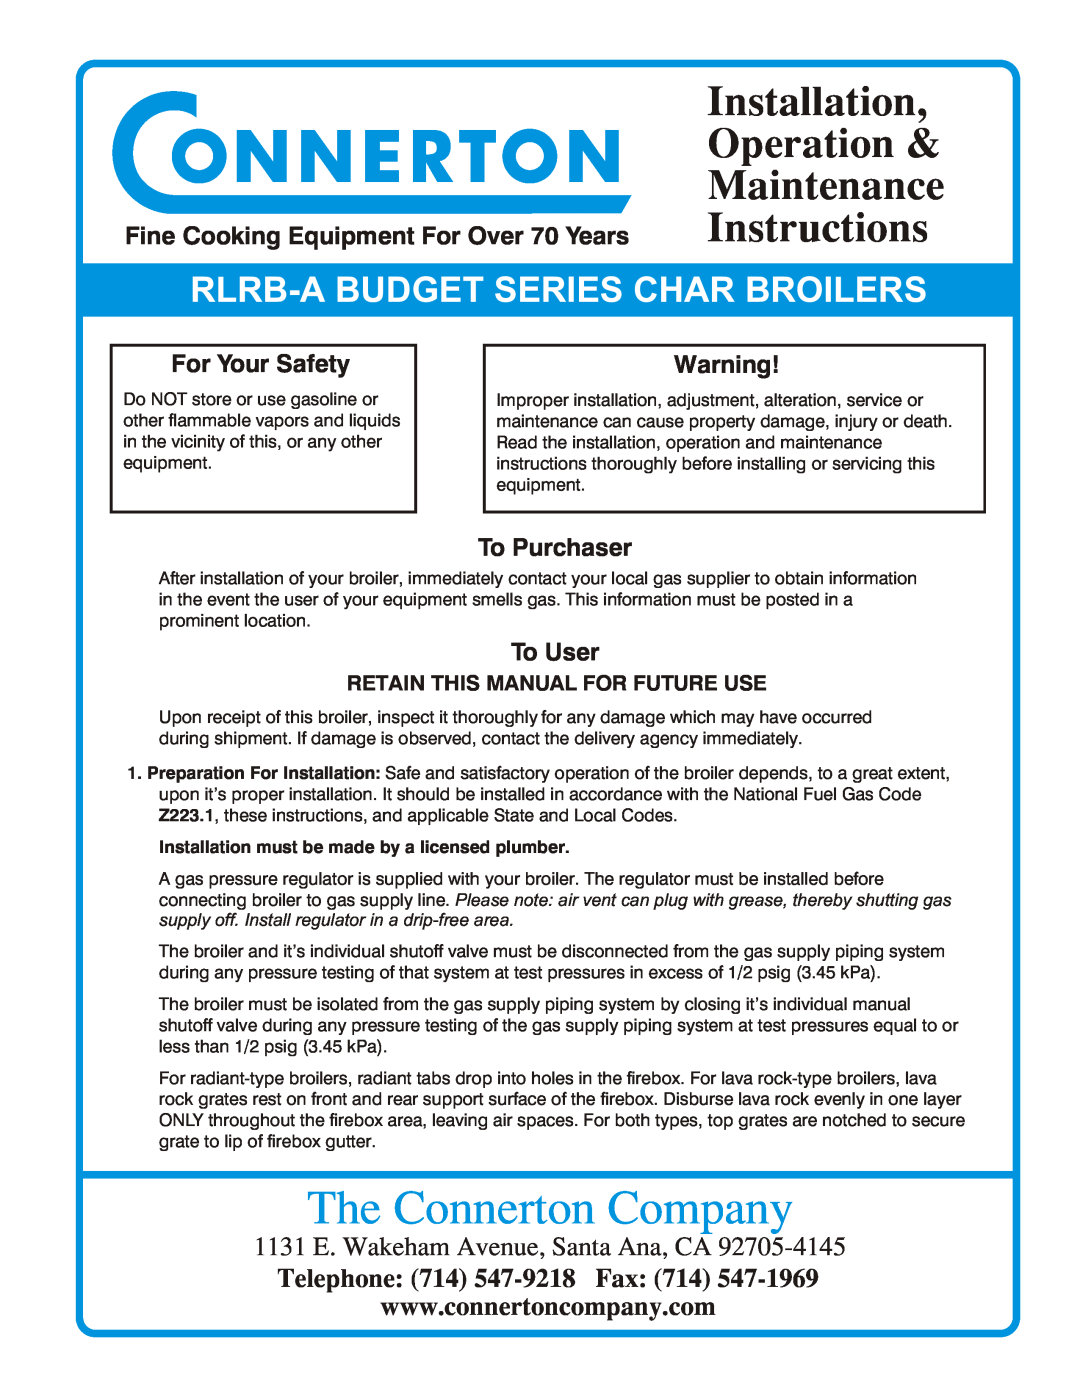 Connerton Co RLRB-A manual Retain This Manual For Future Use, The Connerton Company, Installation, Operation, Instructions 